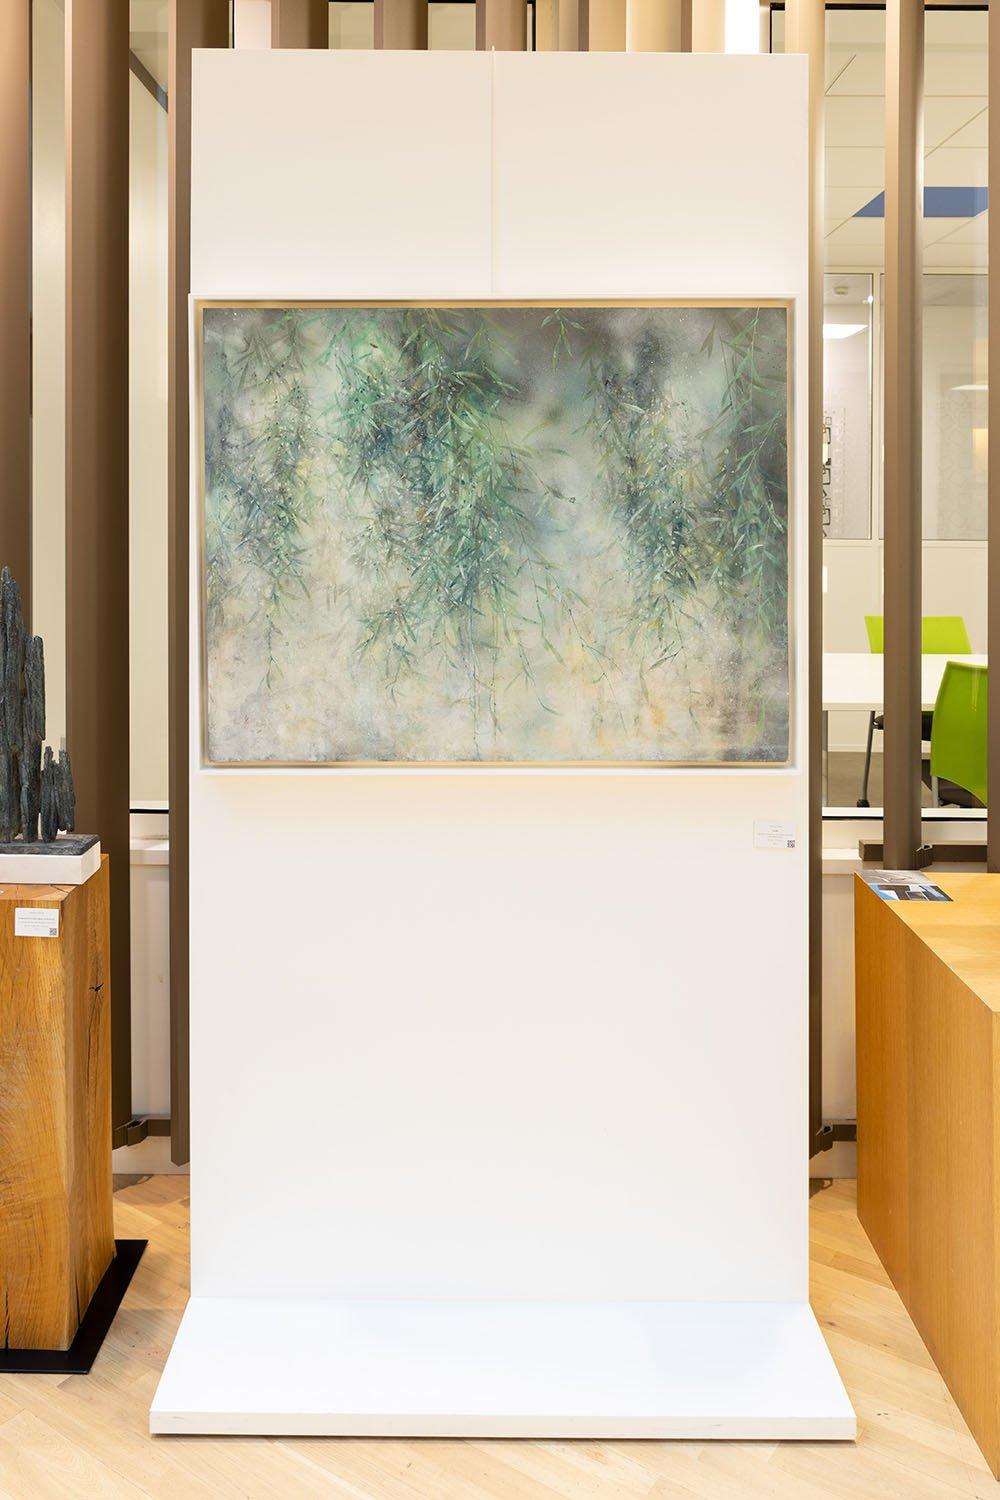 Blast is a unique painting by contemporary artist Yiching Chen. The painting is made with mineral pigments on Japanese paper mounted on wood, dimensions are 85 × 110 cm (33.5 × 43.3 in). Dimensions of the framed artwork are 90 x 115 cm (35.4 x 45.2